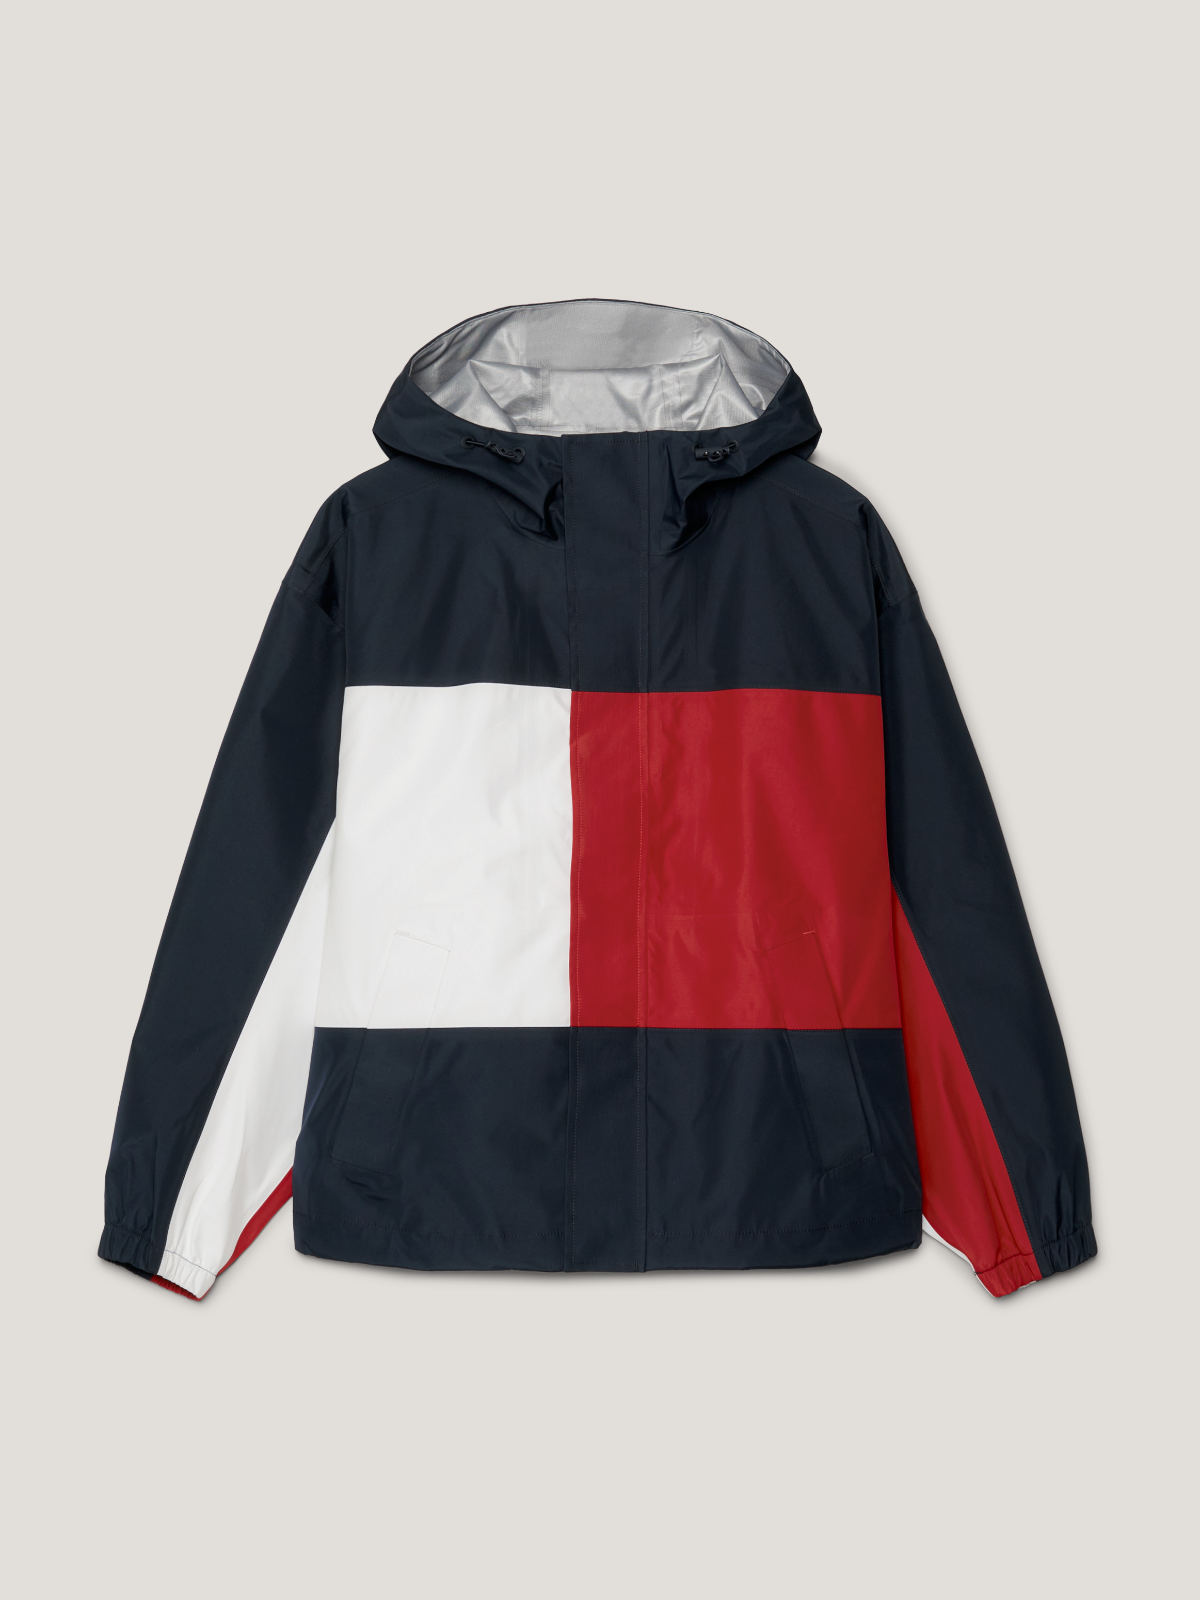 TOMMY HILFIGER AND CLOT ANNOUNCE COLLECTION CELEBRATING THE YEAR